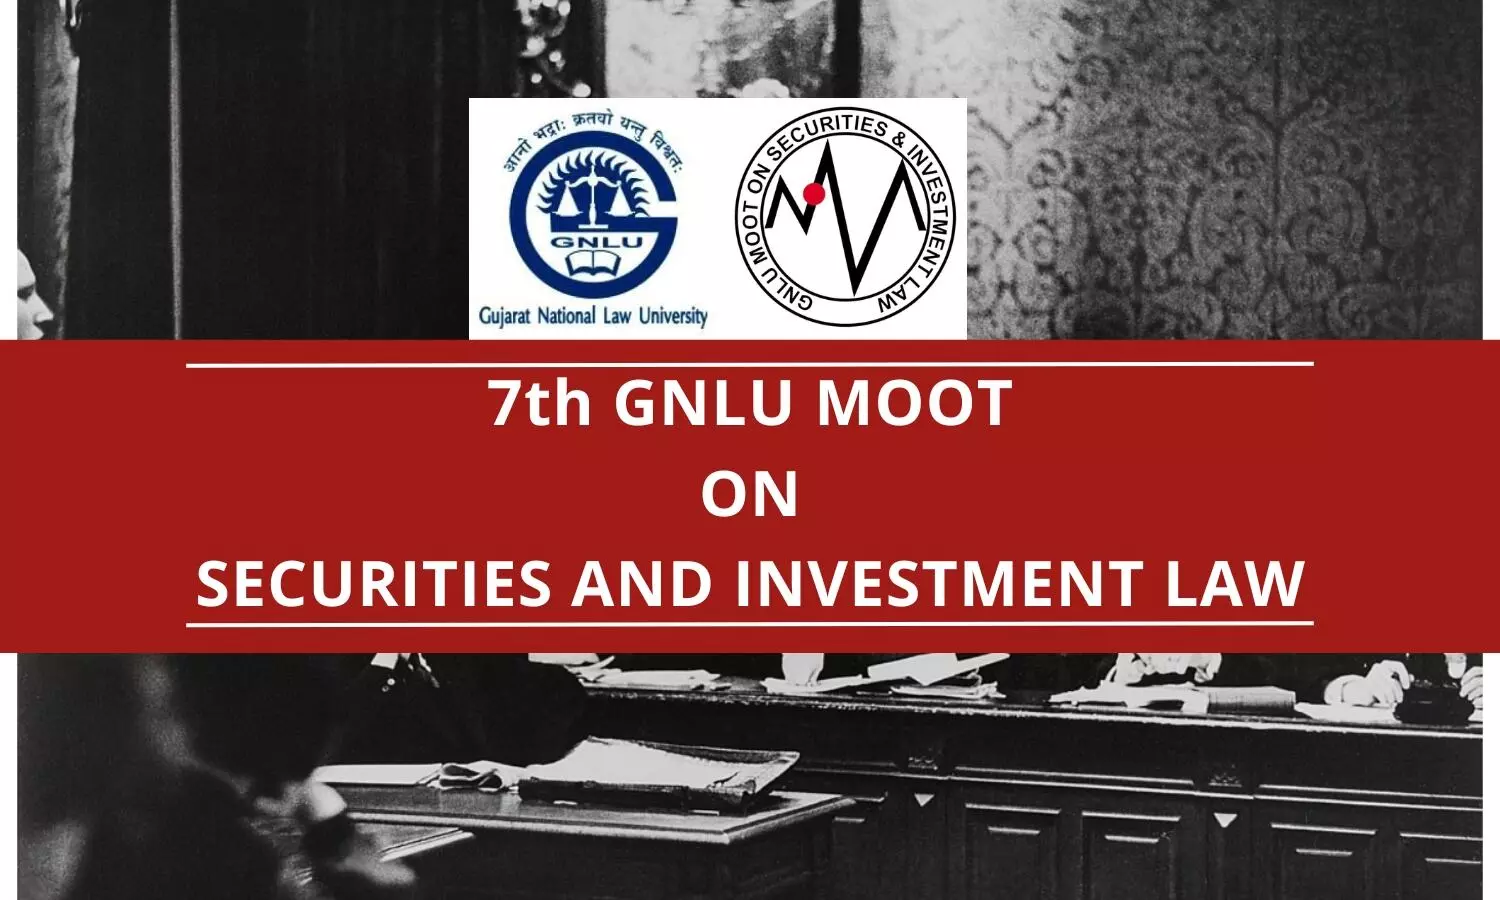 7th GNLU Moot on Securities and Investment Law 2023 | GNLU Gandhinagar